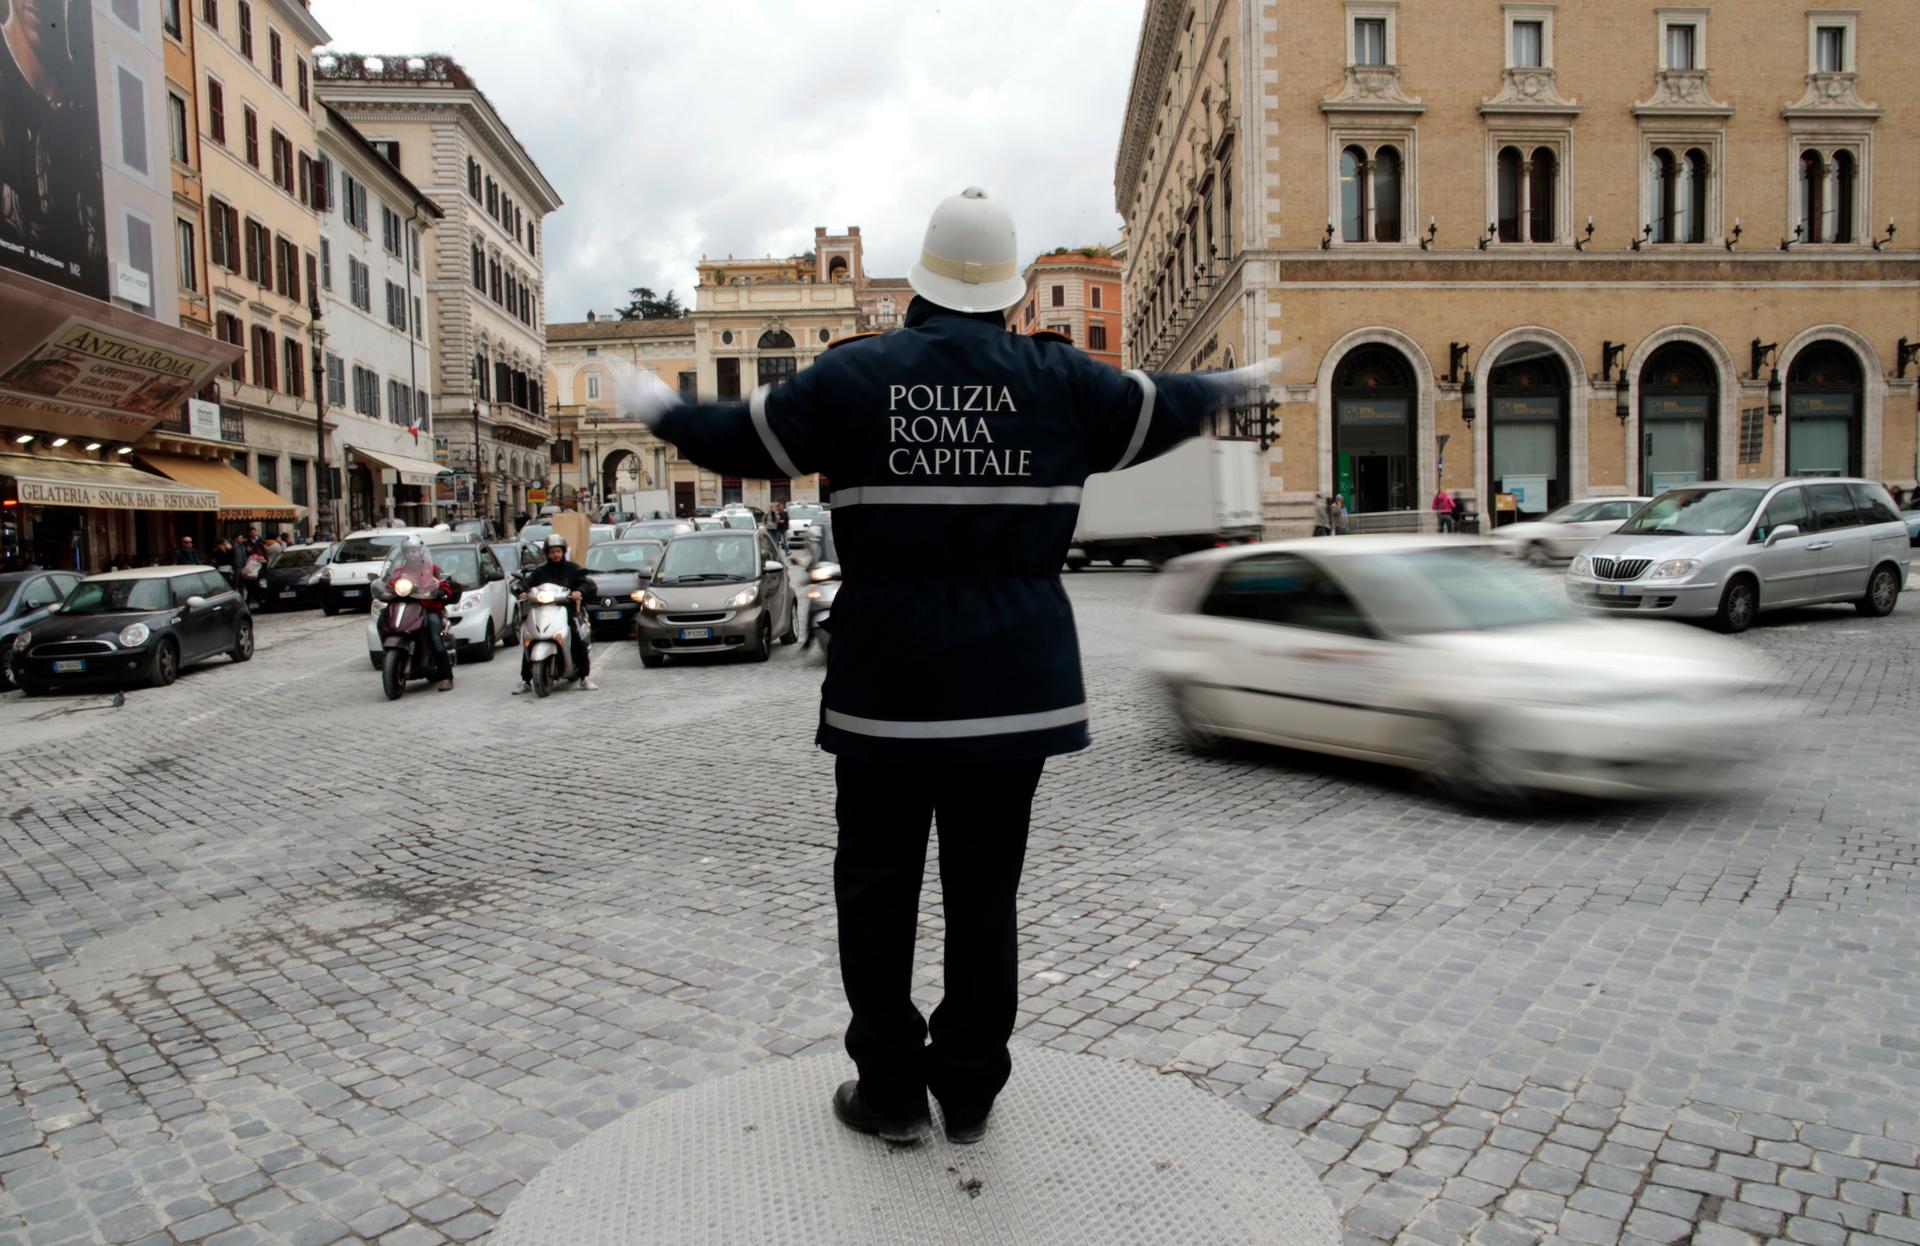 A police man directs traffic in Italy